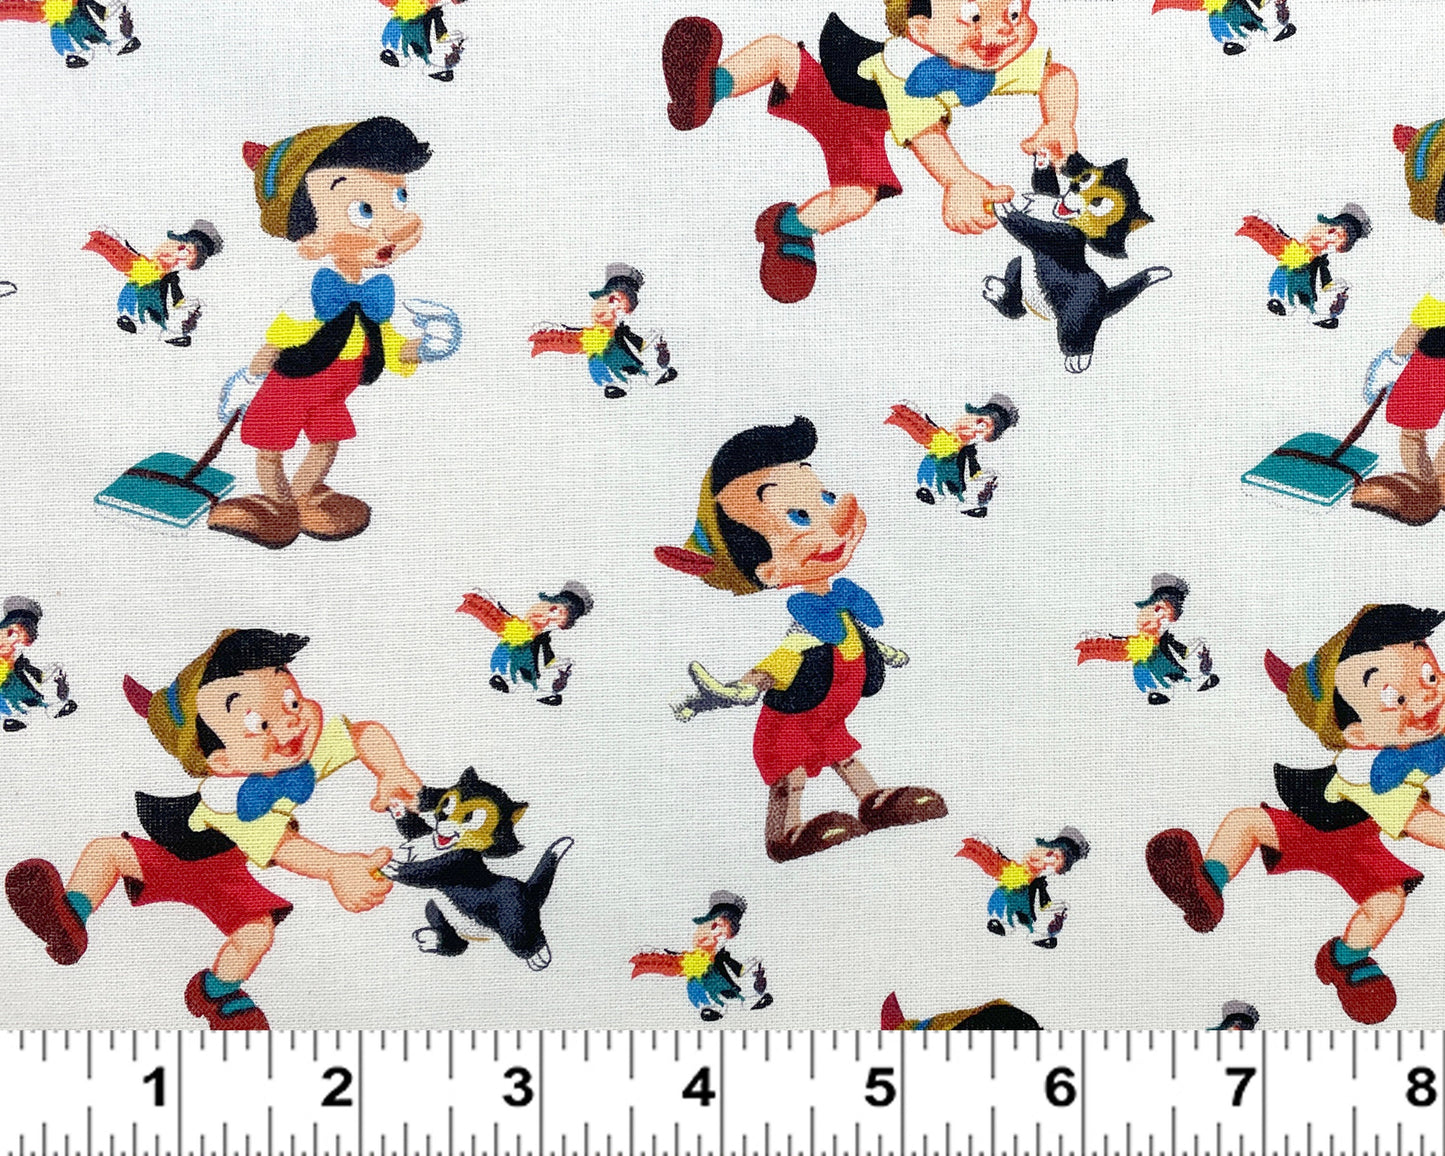 Pinocchio Fabric - Pinocchio Offical Conscience Cotton - 100% Cotton Fabric - Quilting Cotton Dancing Figaro Jiminy Cricket - SHIPS NEXT DAY